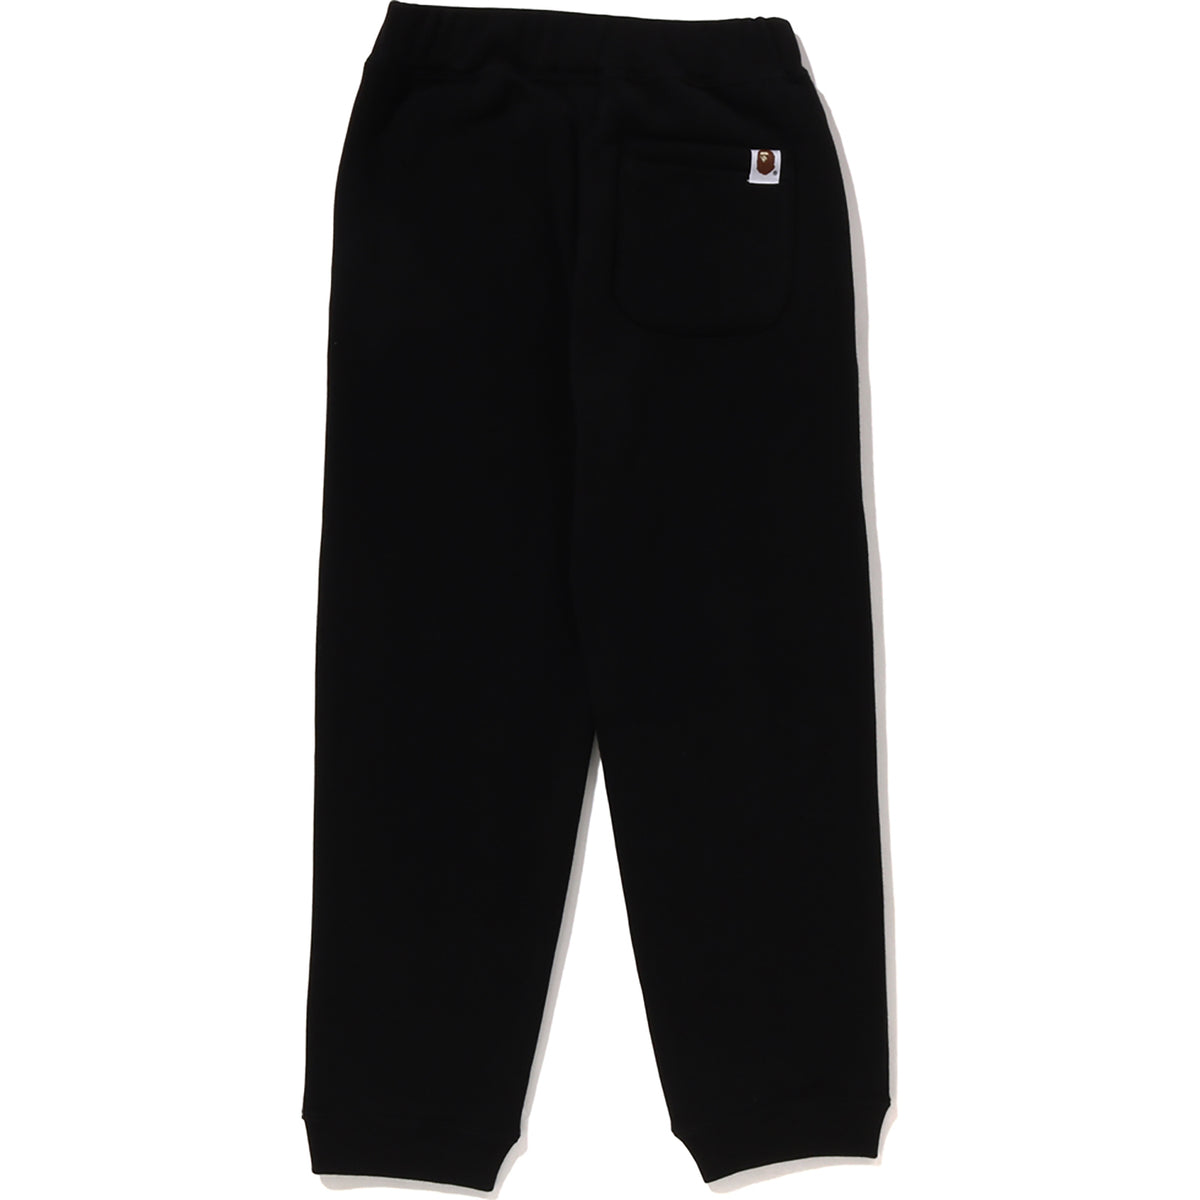 COLLEGE EMBROIDERY SWEAT PANTS RELAXED FIT KIDS